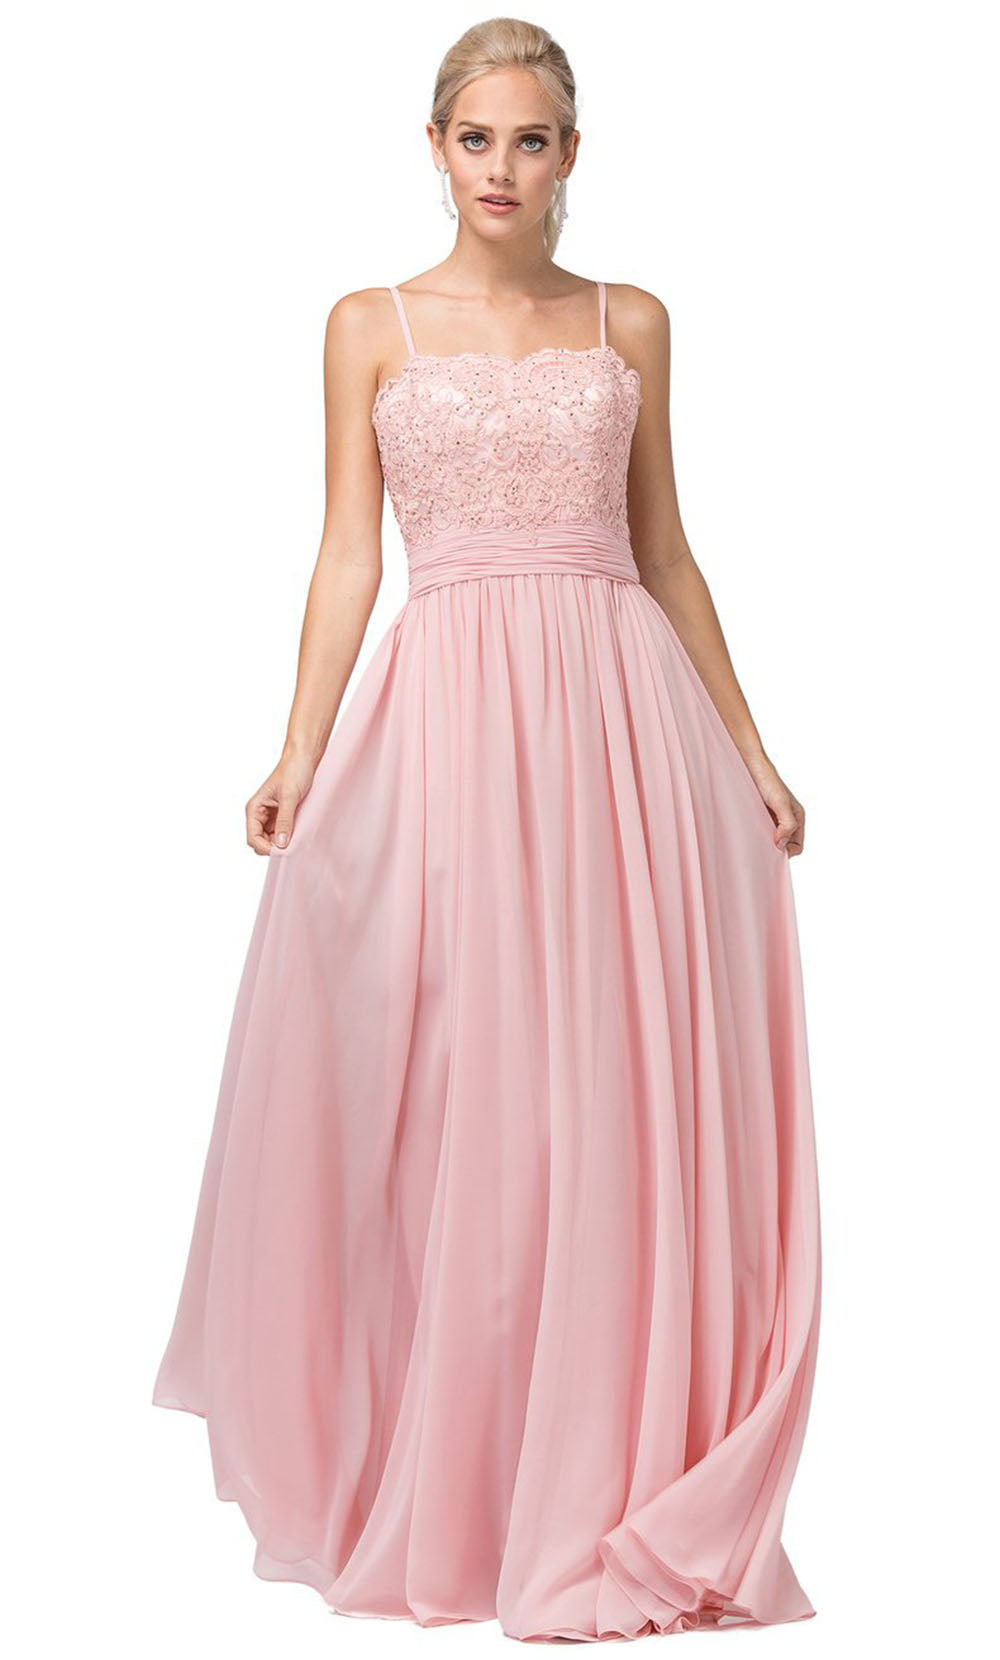 Dancing Queen - 2789 Sleeveless Lace Bodice Slit A-Line Gown In Pink